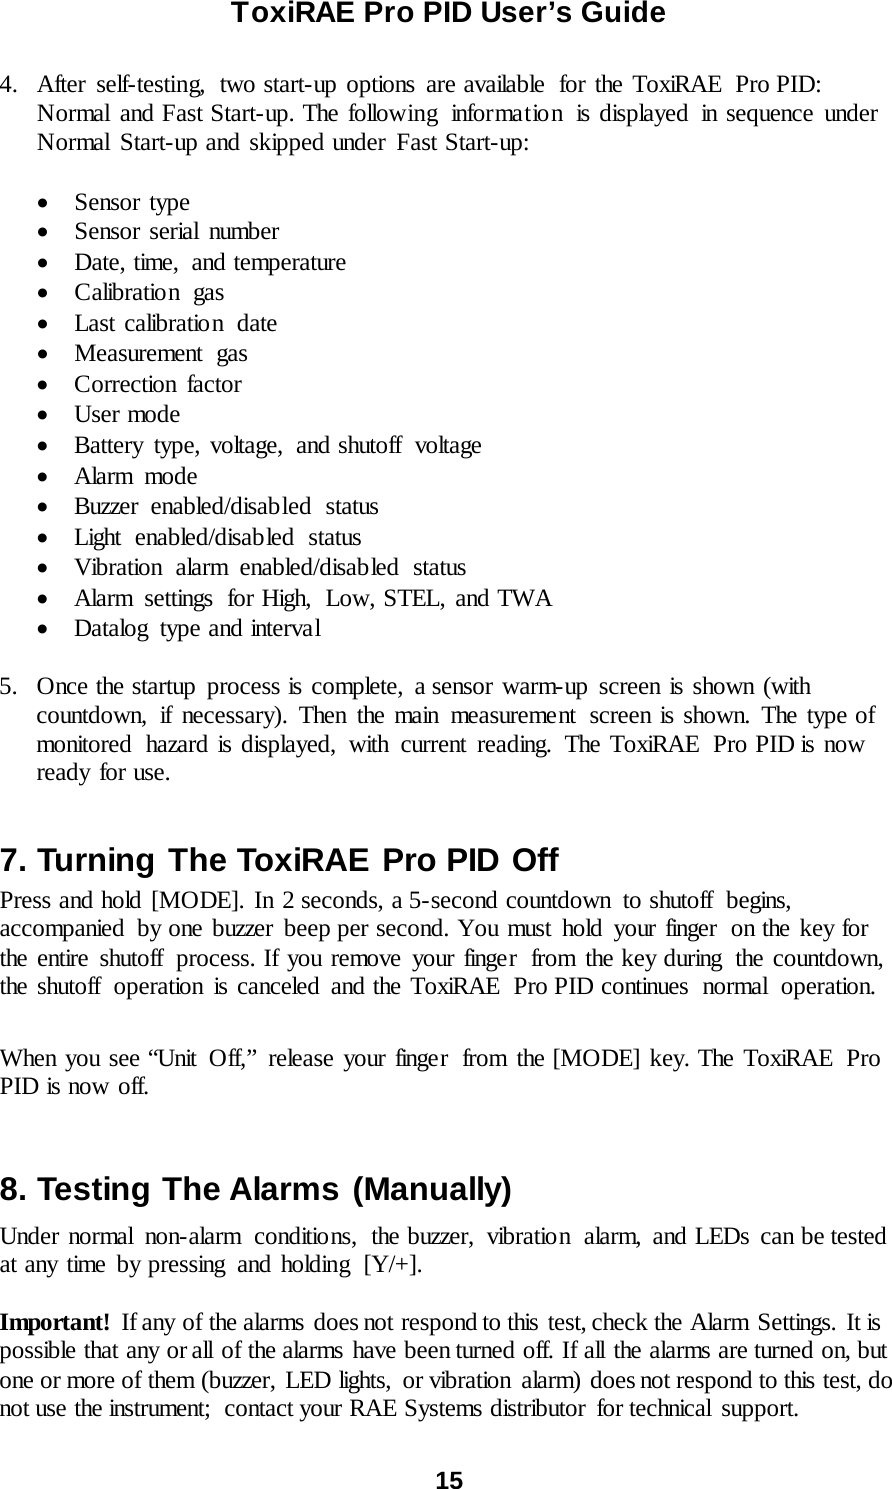 ToxiRAE Pro PID User’s Guide  15   4. After self-testing,  two start-up options are available  for the ToxiRAE  Pro PID: Normal and Fast Start-up. The following  information  is displayed in sequence under Normal Start-up and skipped under Fast Start-up:  • Sensor type • Sensor serial number • Date, time,  and temperature • Calibratio n gas • Last calibration date • Measurement gas • Correction factor • User mode • Battery type, voltage, and shutoff  voltage • Alarm mode • Buzzer enabled/disabled status • Light enabled/disabled status • Vibration alarm enabled/disabled status • Alarm settings for High, Low, STEL, and TWA • Datalog  type and interval  5. Once the startup process is complete, a sensor warm-up screen is shown (with countdown, if necessary). Then the main measurement  screen is shown. The type of monitored hazard is displayed, with current reading. The ToxiRAE  Pro PID is now ready for use.  7. Turning The ToxiRAE Pro PID Off Press and hold [MODE]. In 2 seconds, a 5-second countdown  to shutoff  begins, accompanied  by one buzzer beep per second. You must hold your finger  on the key for the entire shutoff process. If you remove your finger  from the key during  the countdown, the shutoff  operation is canceled and the ToxiRAE  Pro PID continues normal operation.  When you see “Unit Off,” release your finger  from the [MODE] key. The ToxiRAE Pro PID is now off.  8. Testing The Alarms (Manually) Under normal non-alarm  conditions,  the buzzer,  vibration  alarm, and LEDs can be tested at any time by pressing and holding [Y/+].  Important!  If any of the alarms does not respond to this test, check the Alarm Settings. It is possible that any or all of the alarms have been turned off. If all the alarms are turned on, but one or more of them (buzzer, LED lights,  or vibration  alarm) does not respond to this test, do not use the instrument;  contact your RAE Systems distributor  for technical support.  